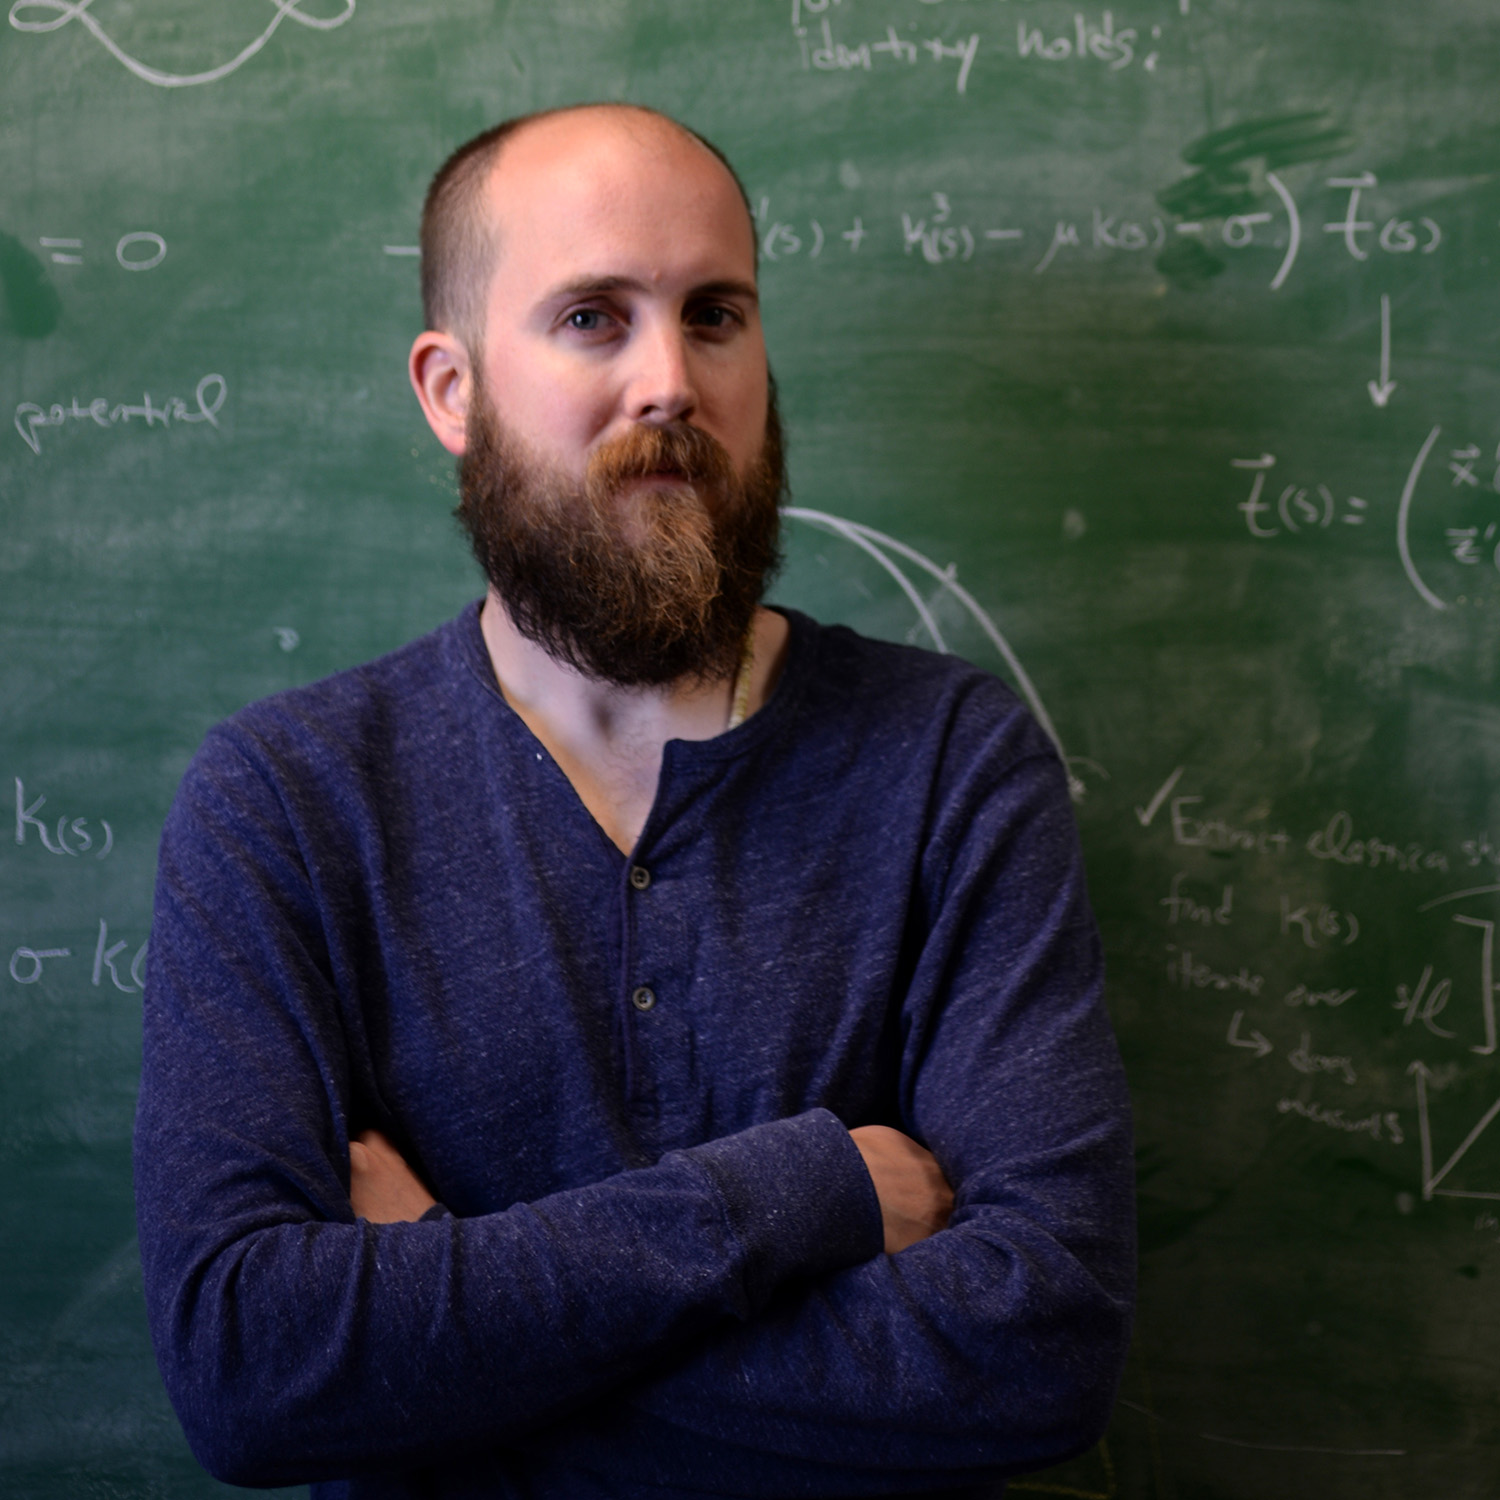 Photo: A picture of a man with a beard in a blue long-sleeved shirt crossing his arms. He is standing in front of a green chalk board that has white writing on it